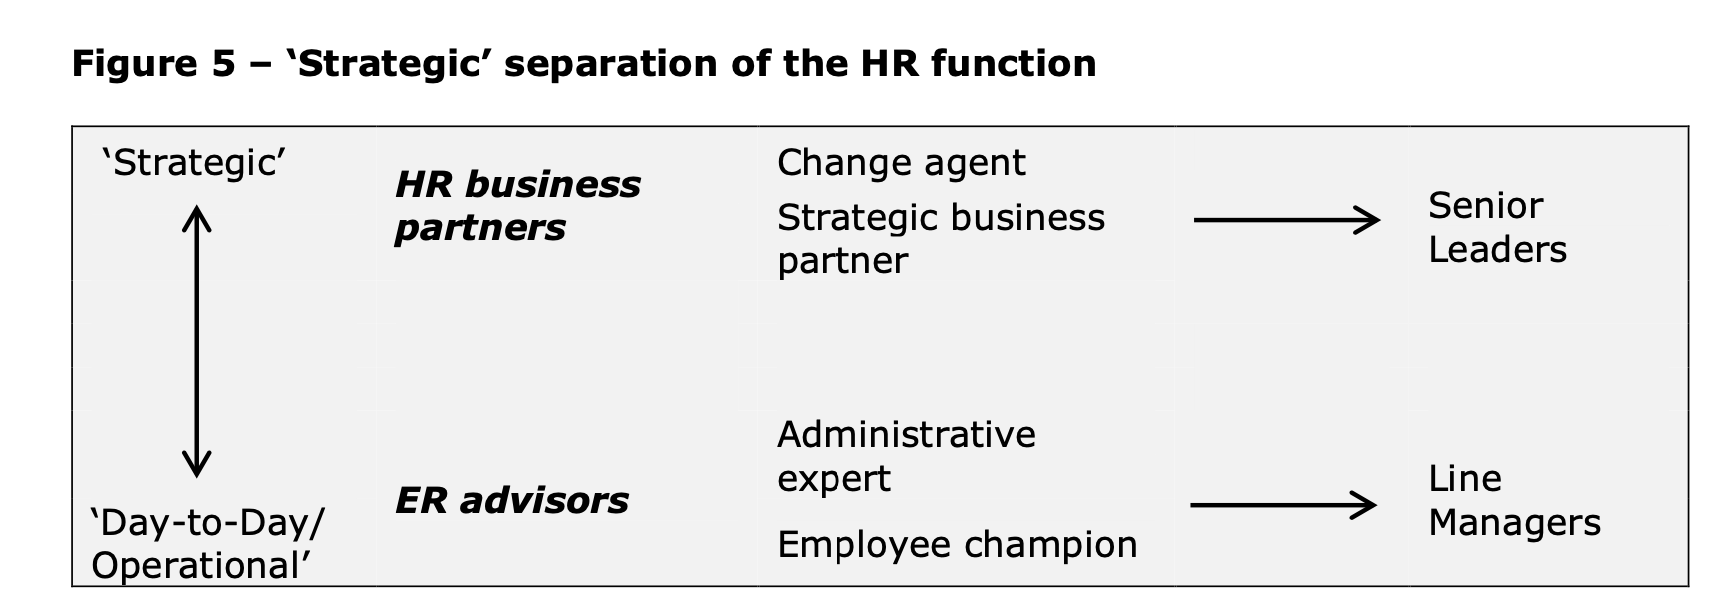 Diagram showing the separation between HR business partners working on strategic issues with senior leaders, and employer advisers providing day-to-day operational support to line managers.